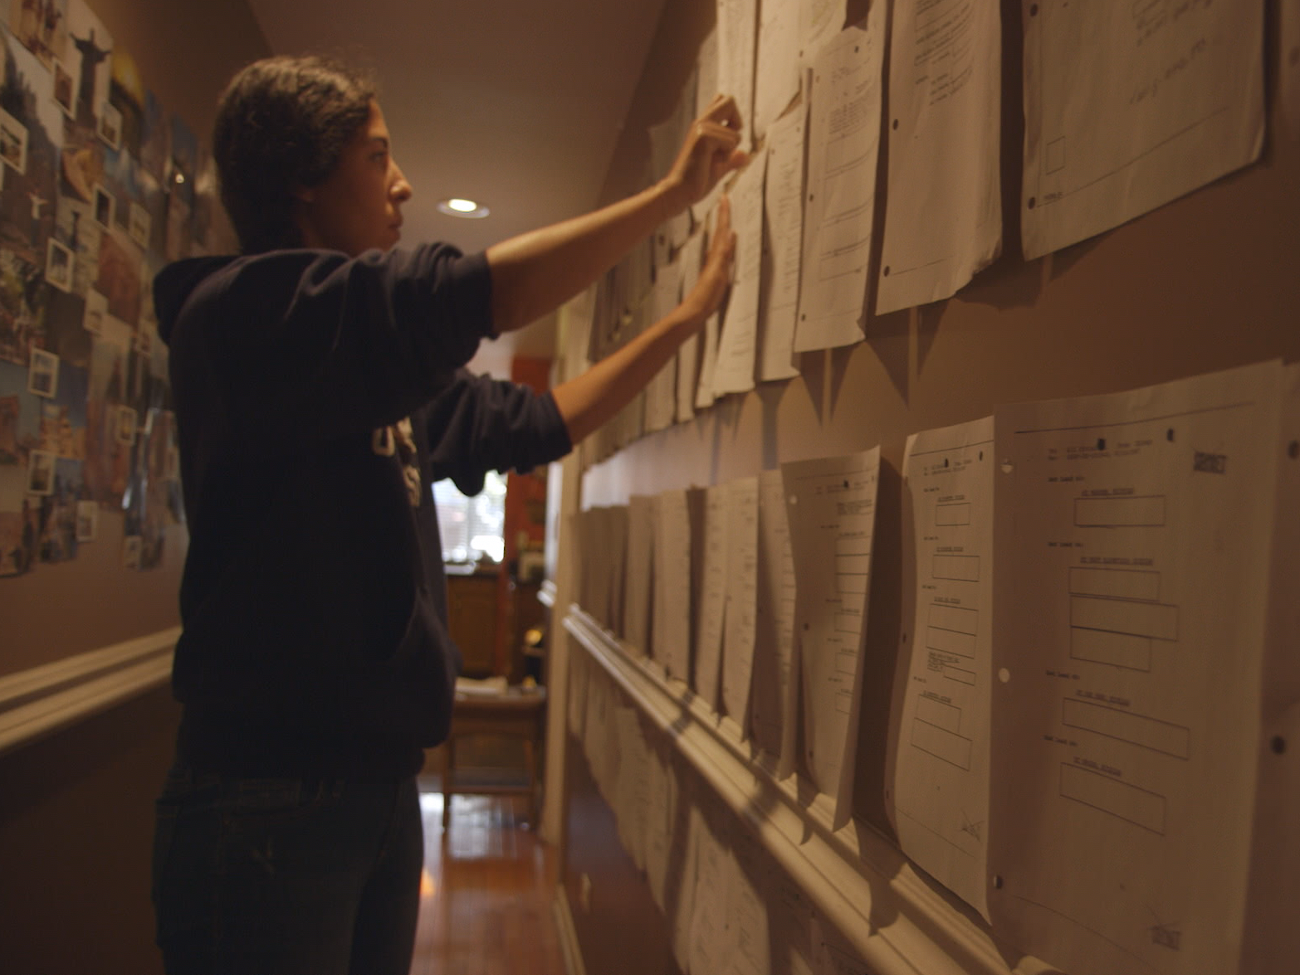 The Feeling of Being Watched Director Assia Boundaoui assembling FBI documents from Operation Vulgar Betrayal. From The Feeling of Being Watched, directed by Assia Bouadaoui. Courtesy of Watched Film, LLC